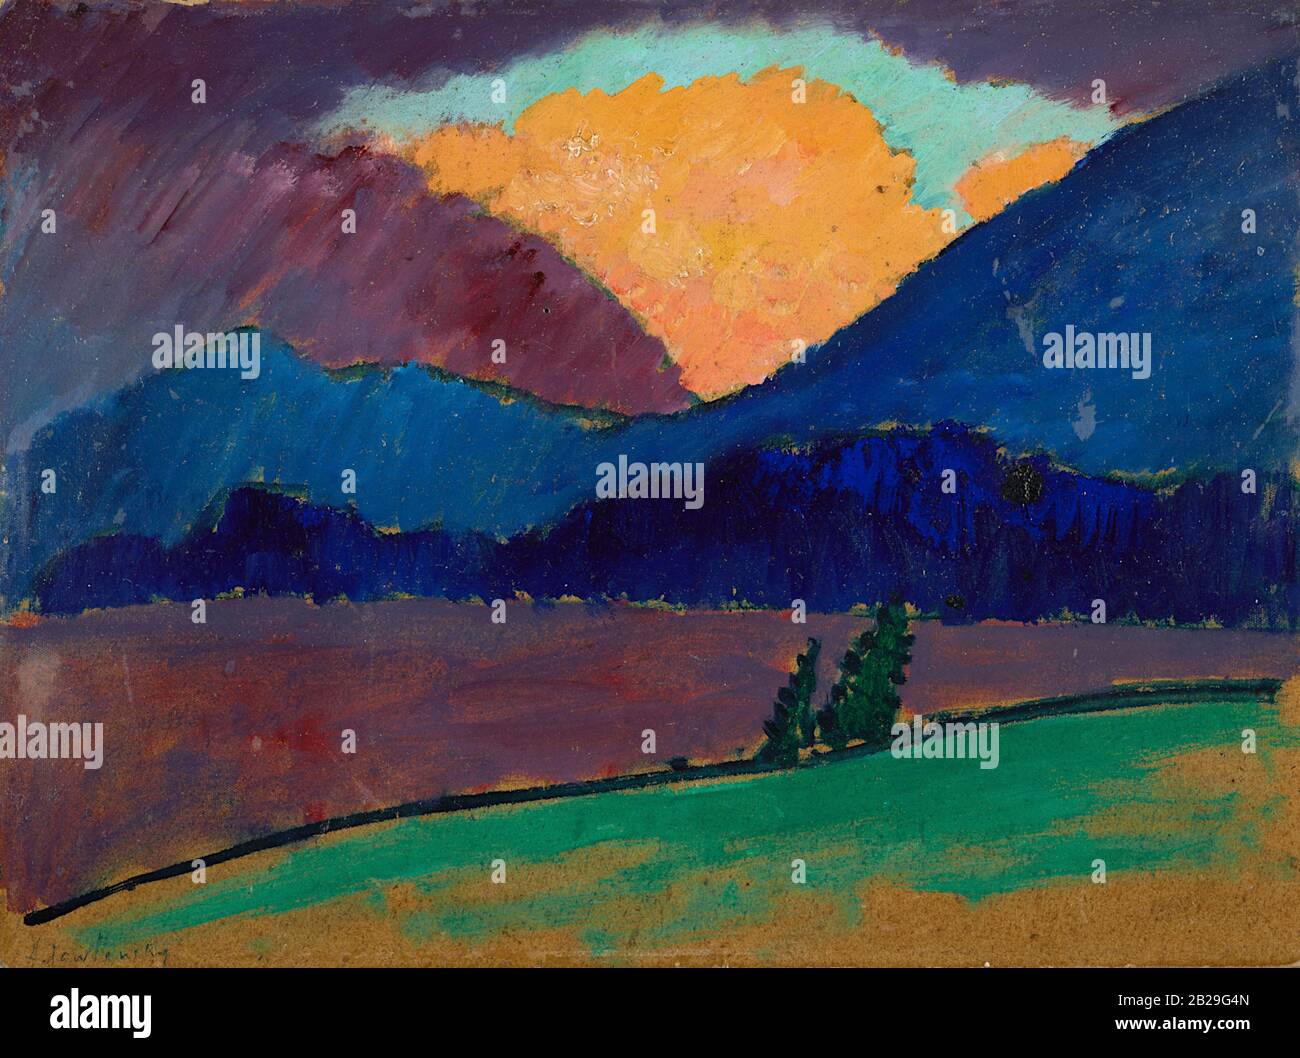 Summer Evening in Murnau (Sommerabend in Murnau) (1908) painting by Alexej von Jawlensky - Very high quality and resolution image Stock Photo